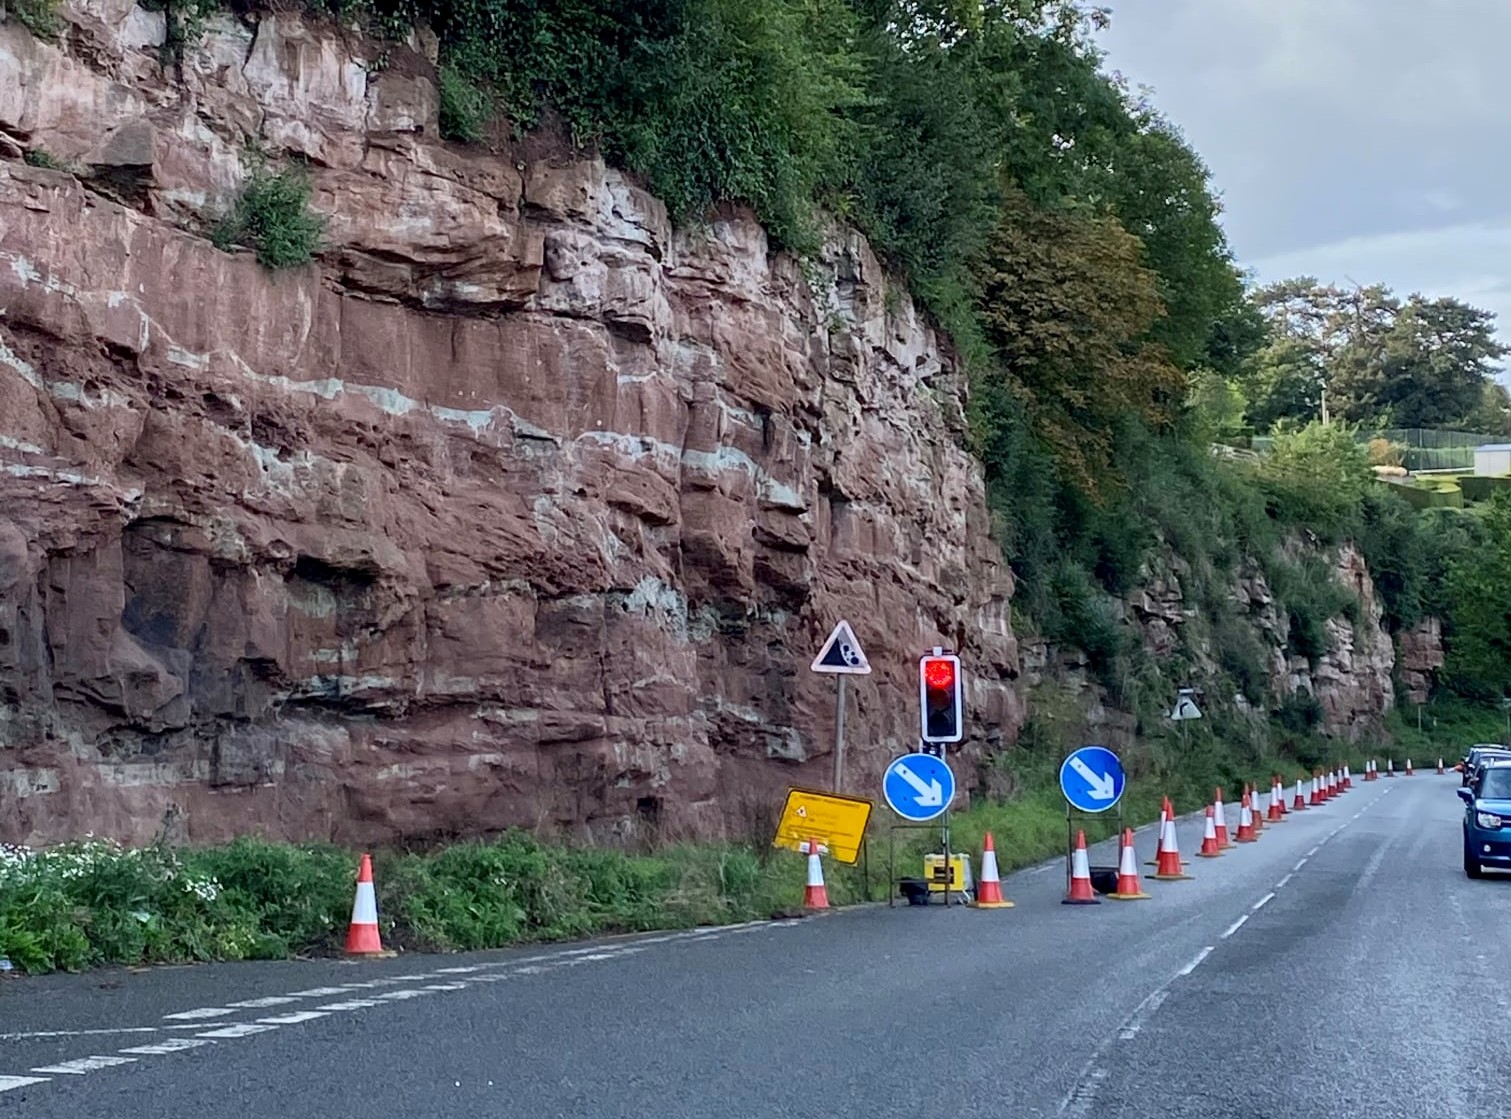 NEWS | Concrete barriers and fencing to be installed on Wilton Road in Ross-on-Wye due to risk of rock fall